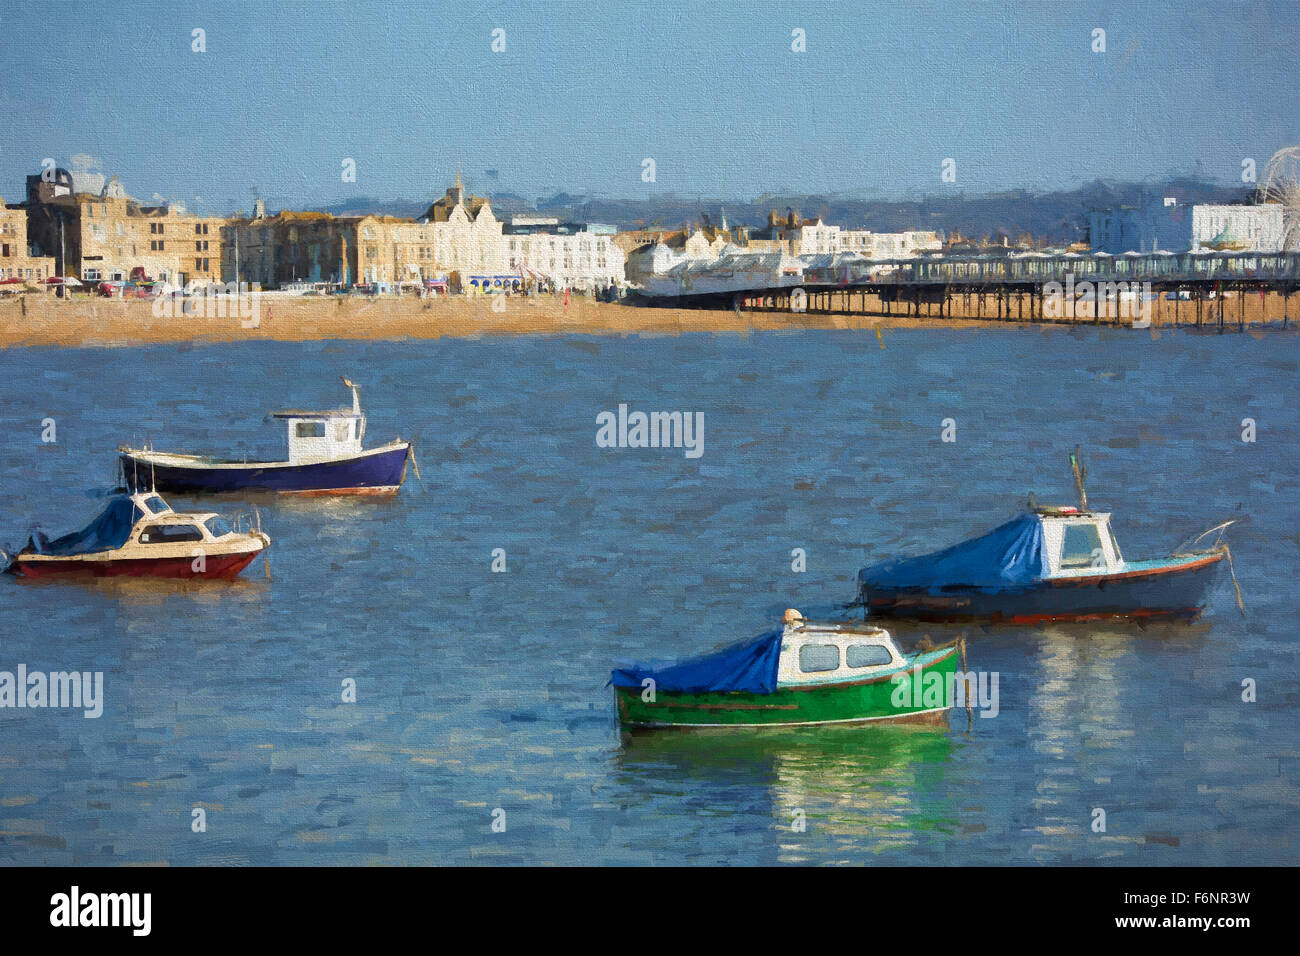 Weston-super-Mare Somerset boats seafront sea and pier illustration like oil painting Stock Photo